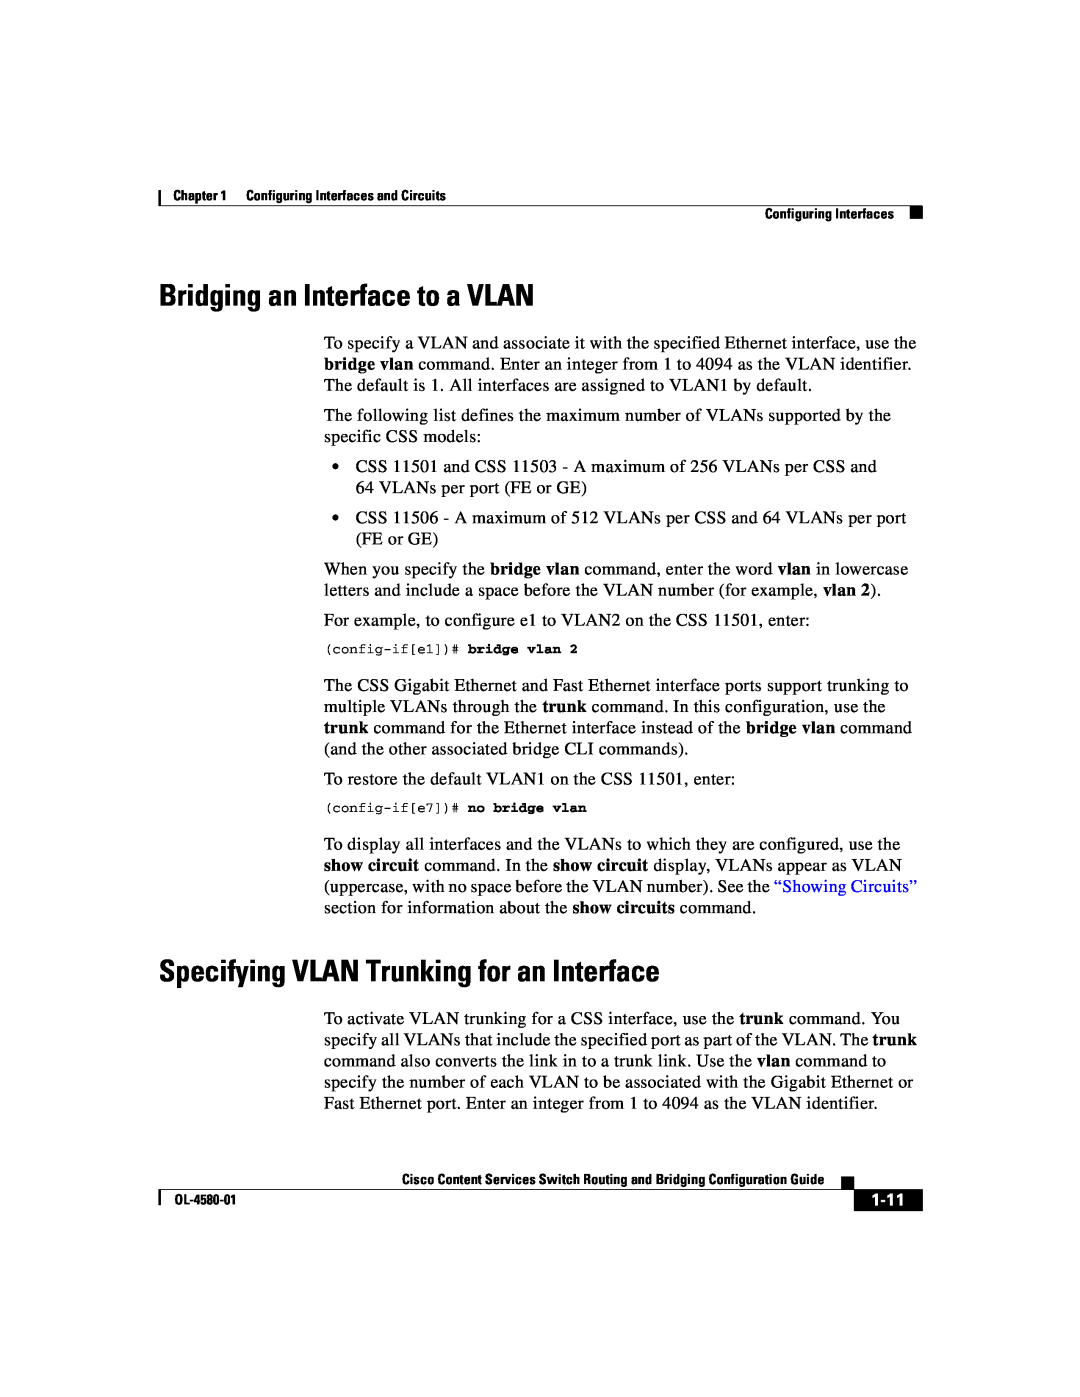 Cisco Systems OL-4580-01 manual Bridging an Interface to a VLAN, Specifying VLAN Trunking for an Interface, 1-11 